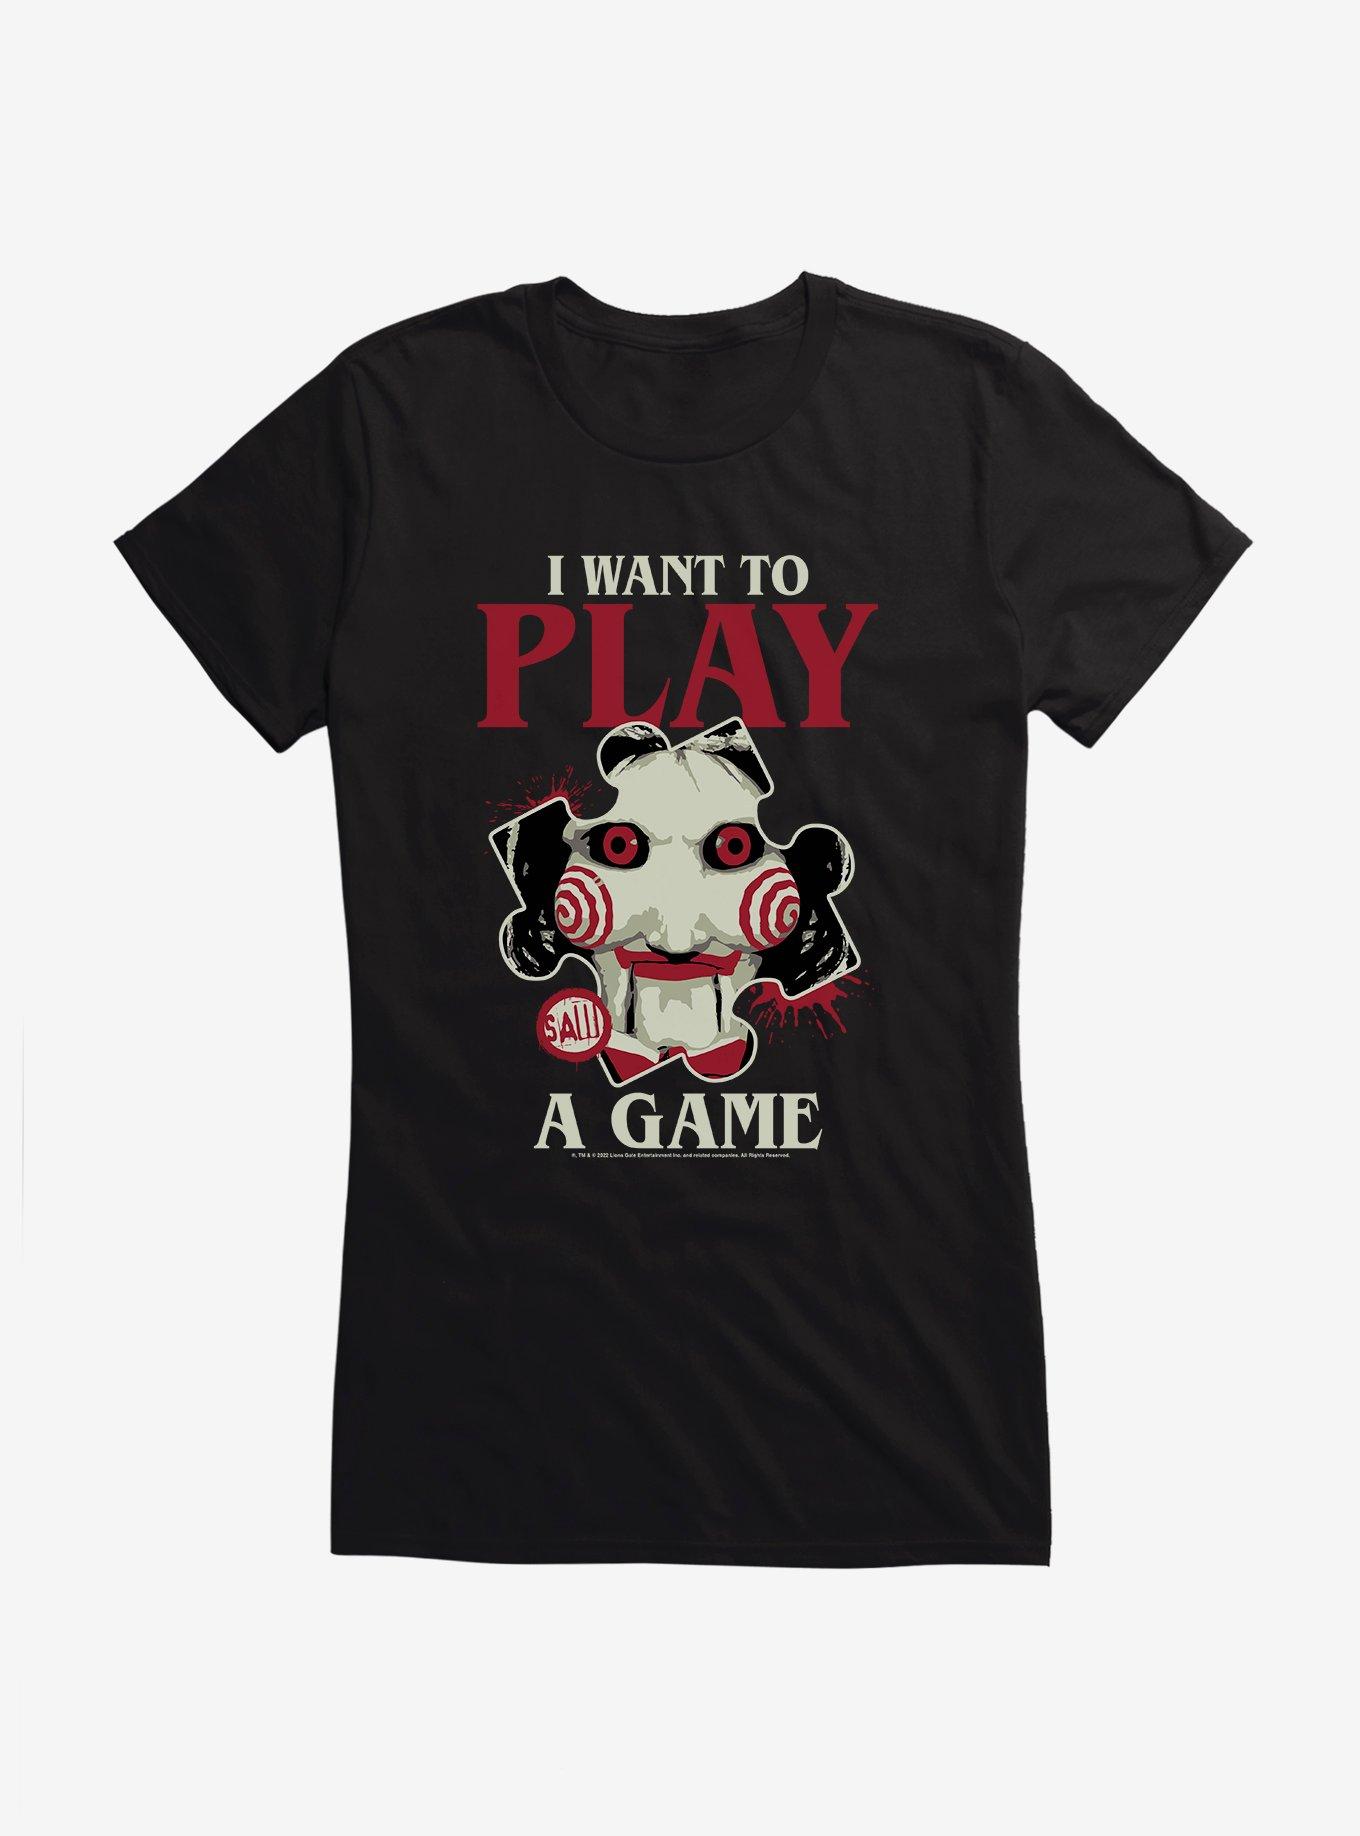 Saw I Want To Play A Game Girls T-Shirt, BLACK, hi-res